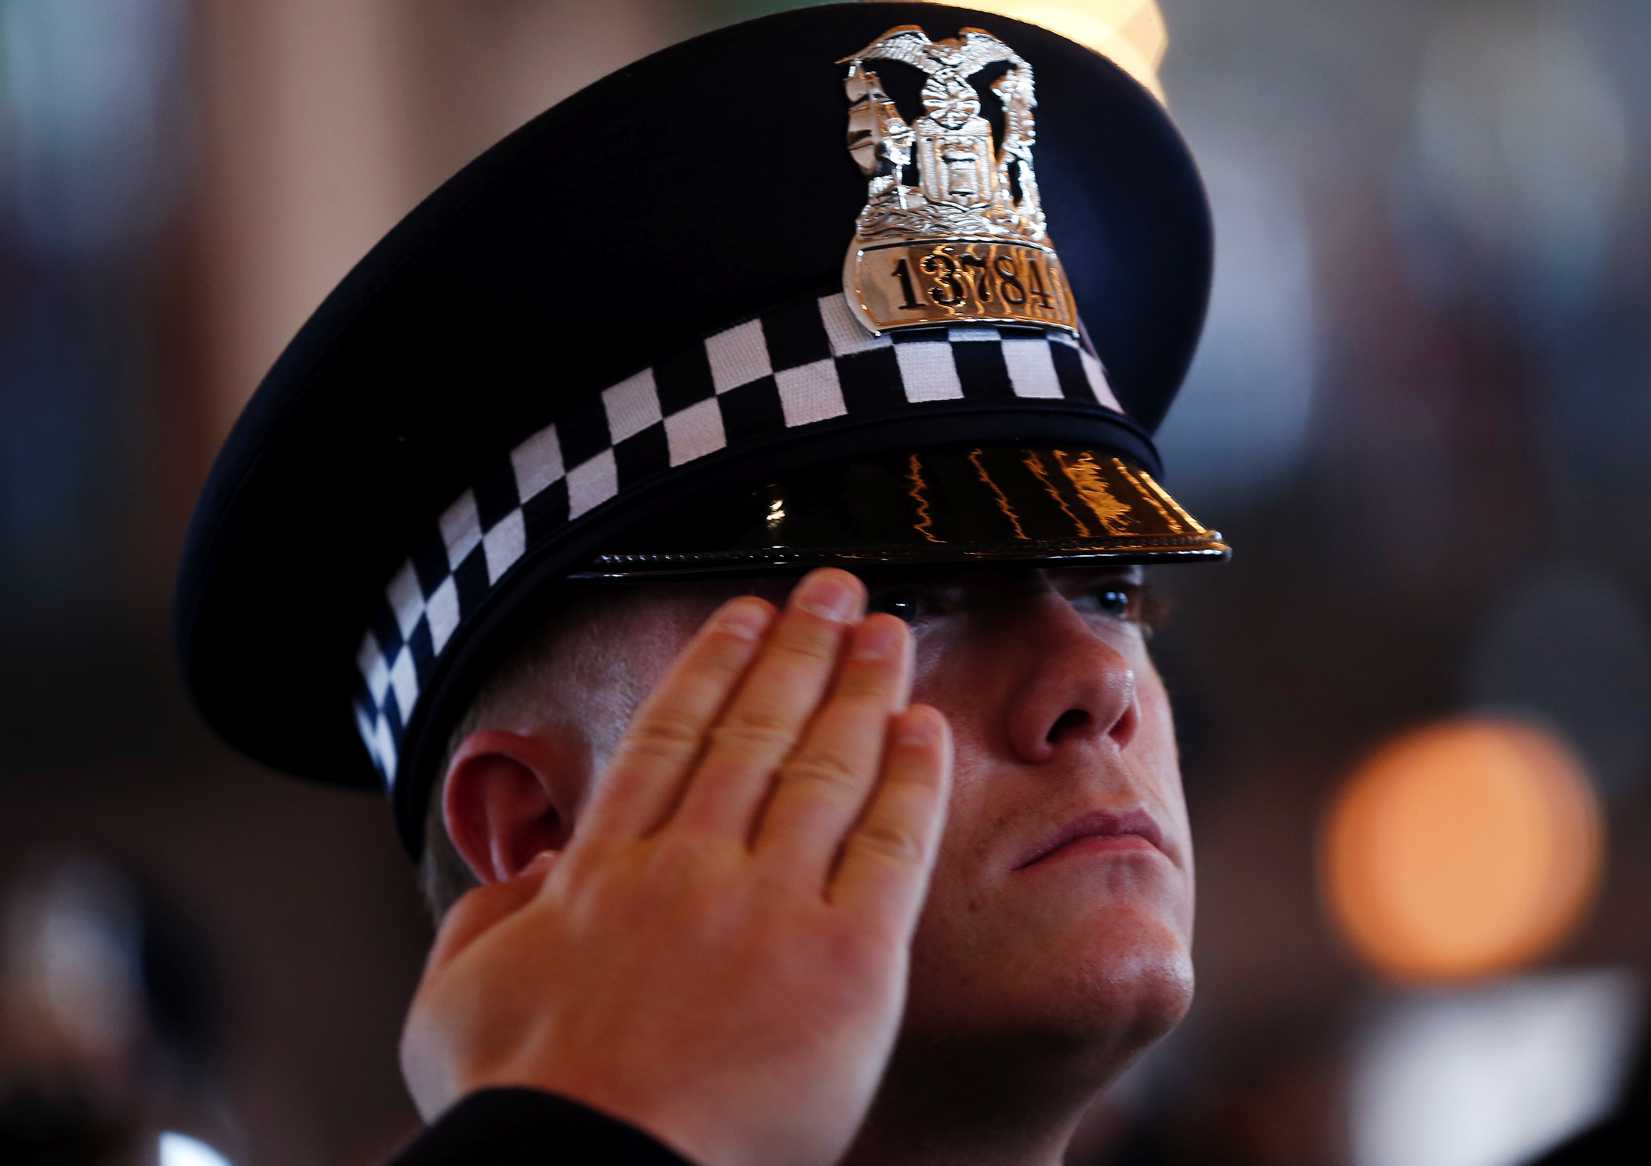 A Chicago Police Department recruit salutes during a graduation ceremony in Chicago, Illinois, April 21, 2014. (Jim Young—Reuters)